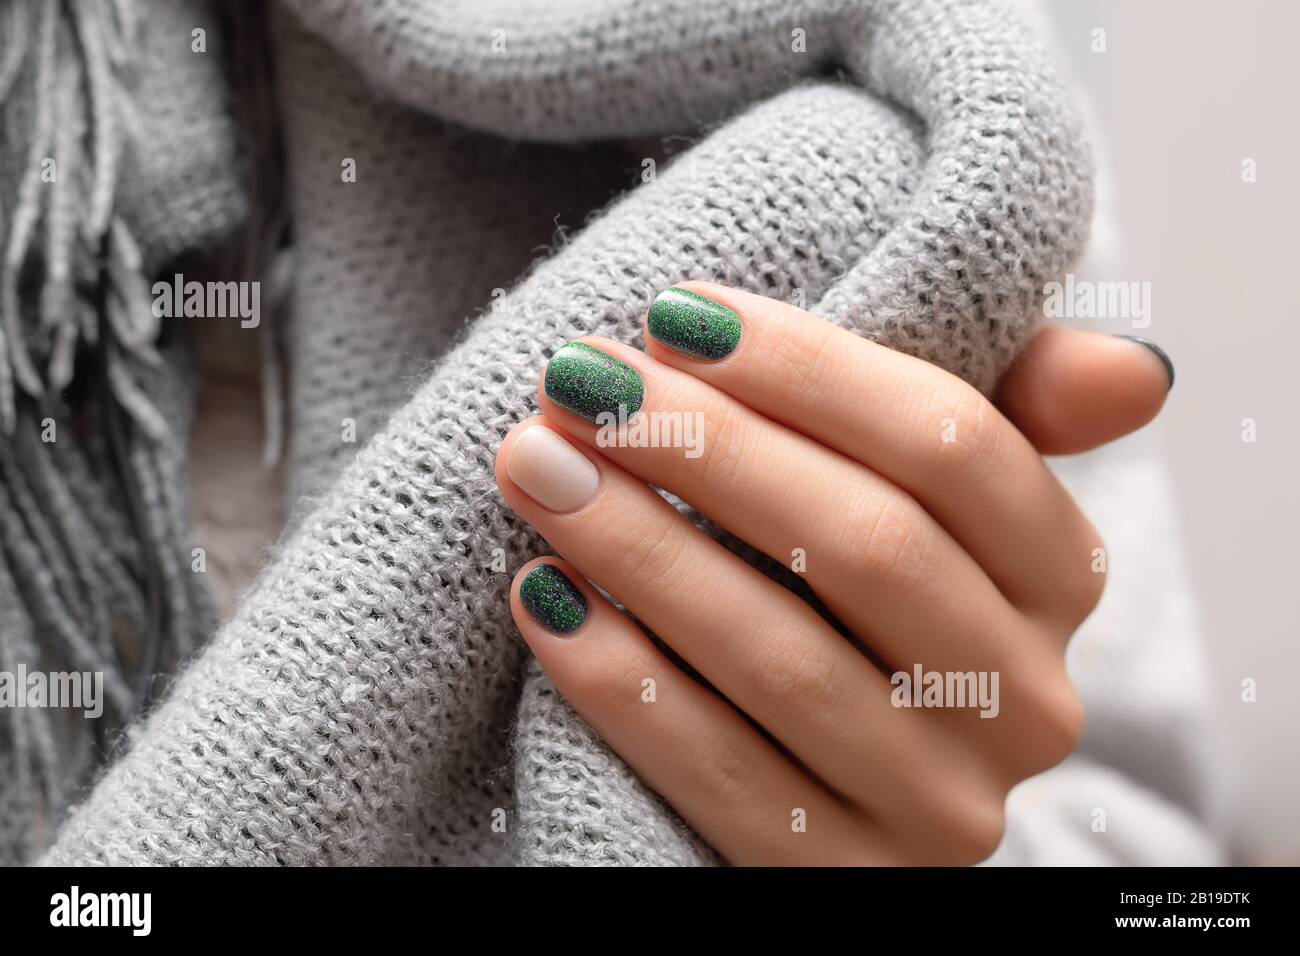 Female hand with green glitter nail design Stock Photo